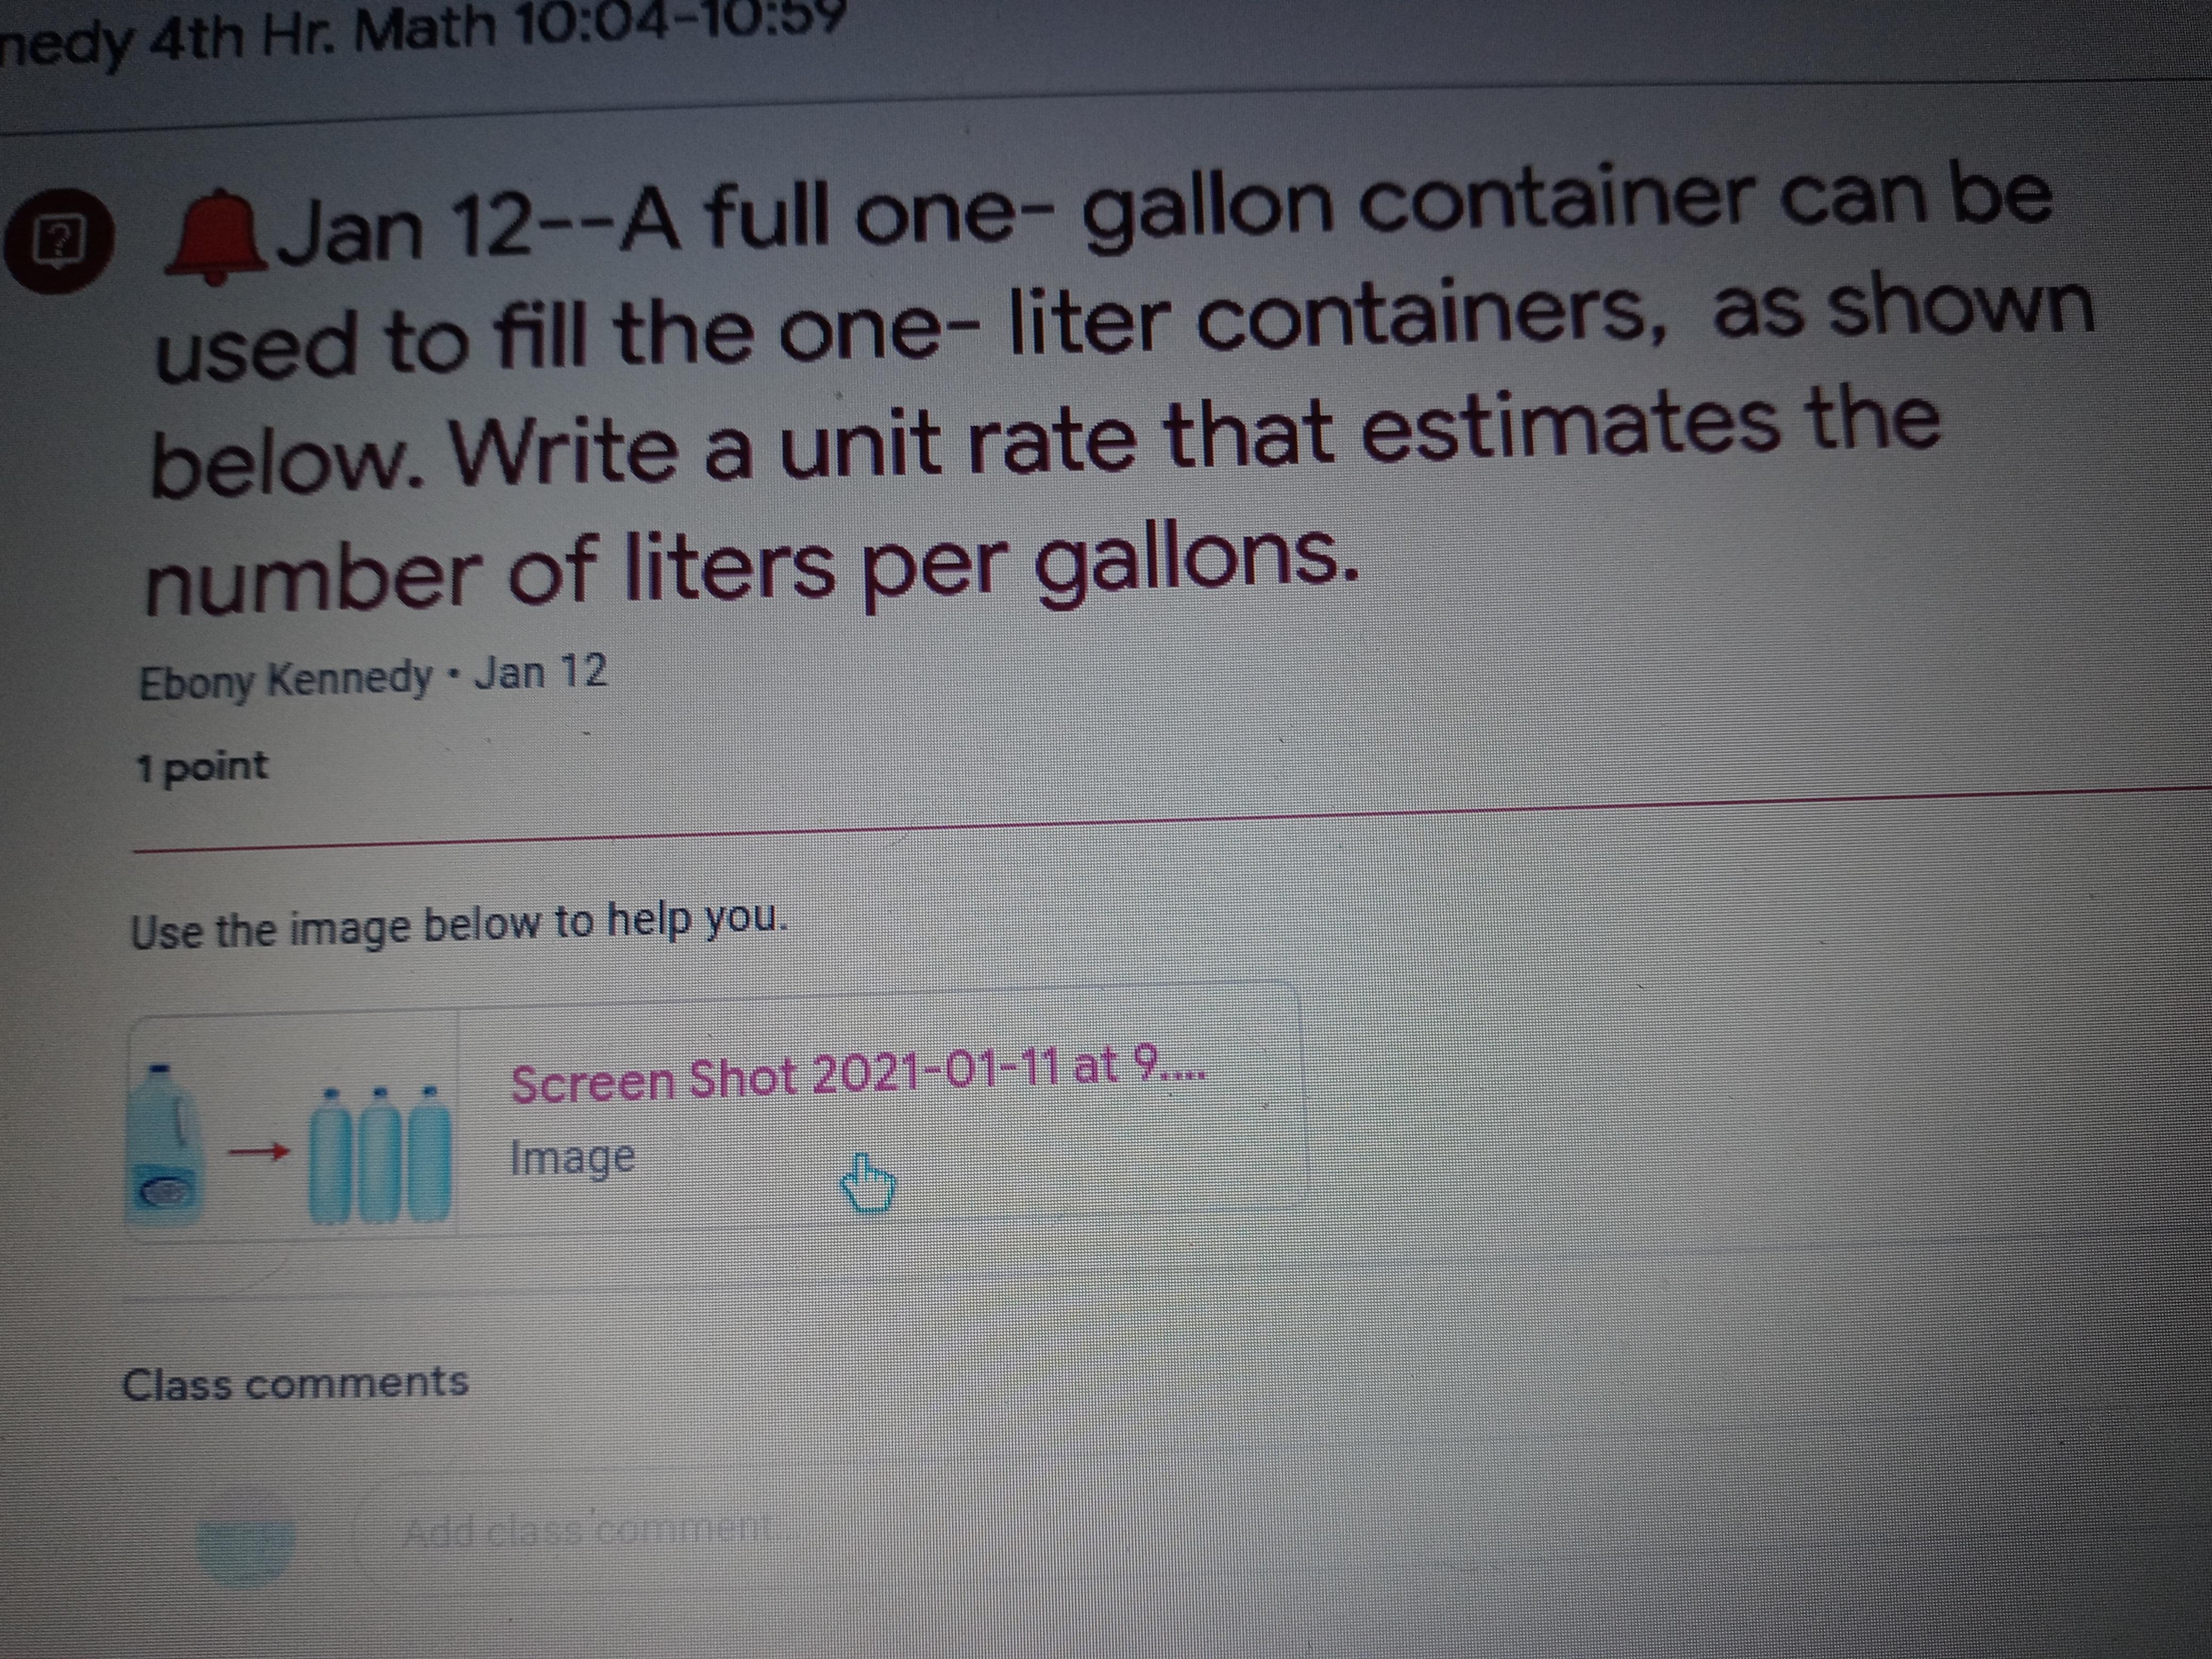 A Full One- Gallon Container Can Beused To Fill The One-liter Containers, As Shownbelow. Write A Unit